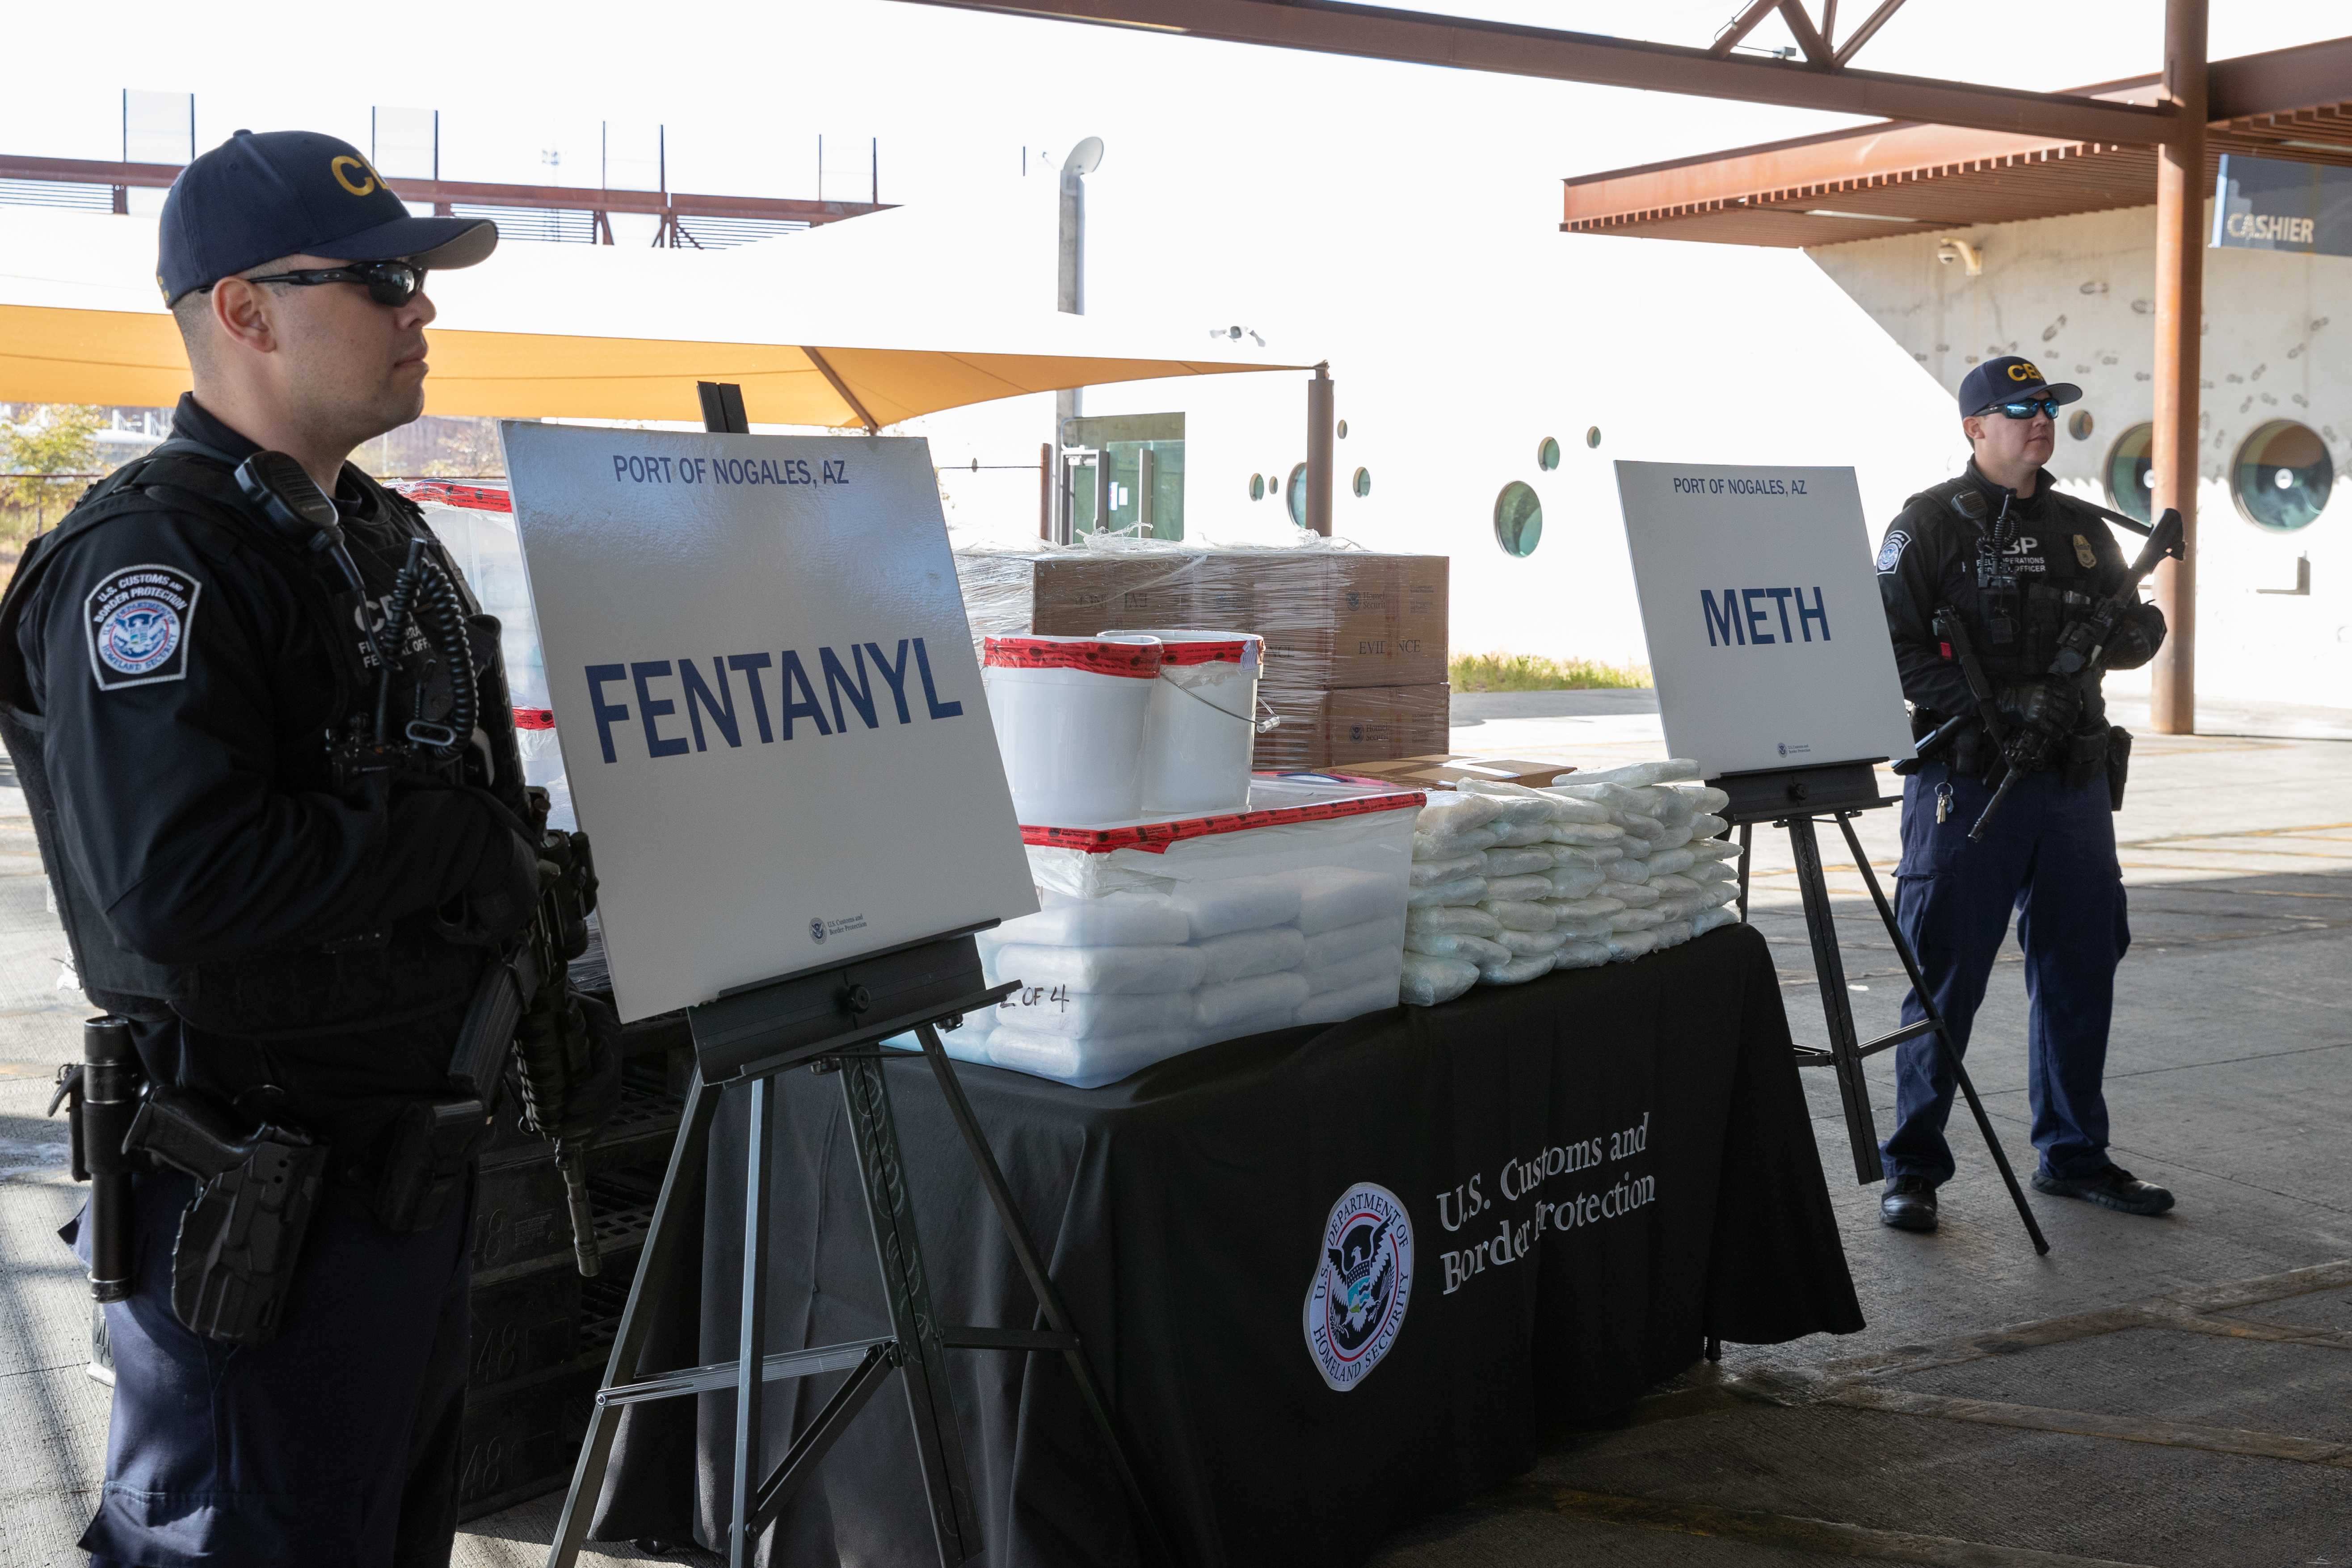 CBP officers in Nogales, Arizona, seized nearly $4.6 million in fentanyl and methamphetamine totaling close to 650 pounds in January 2019. 